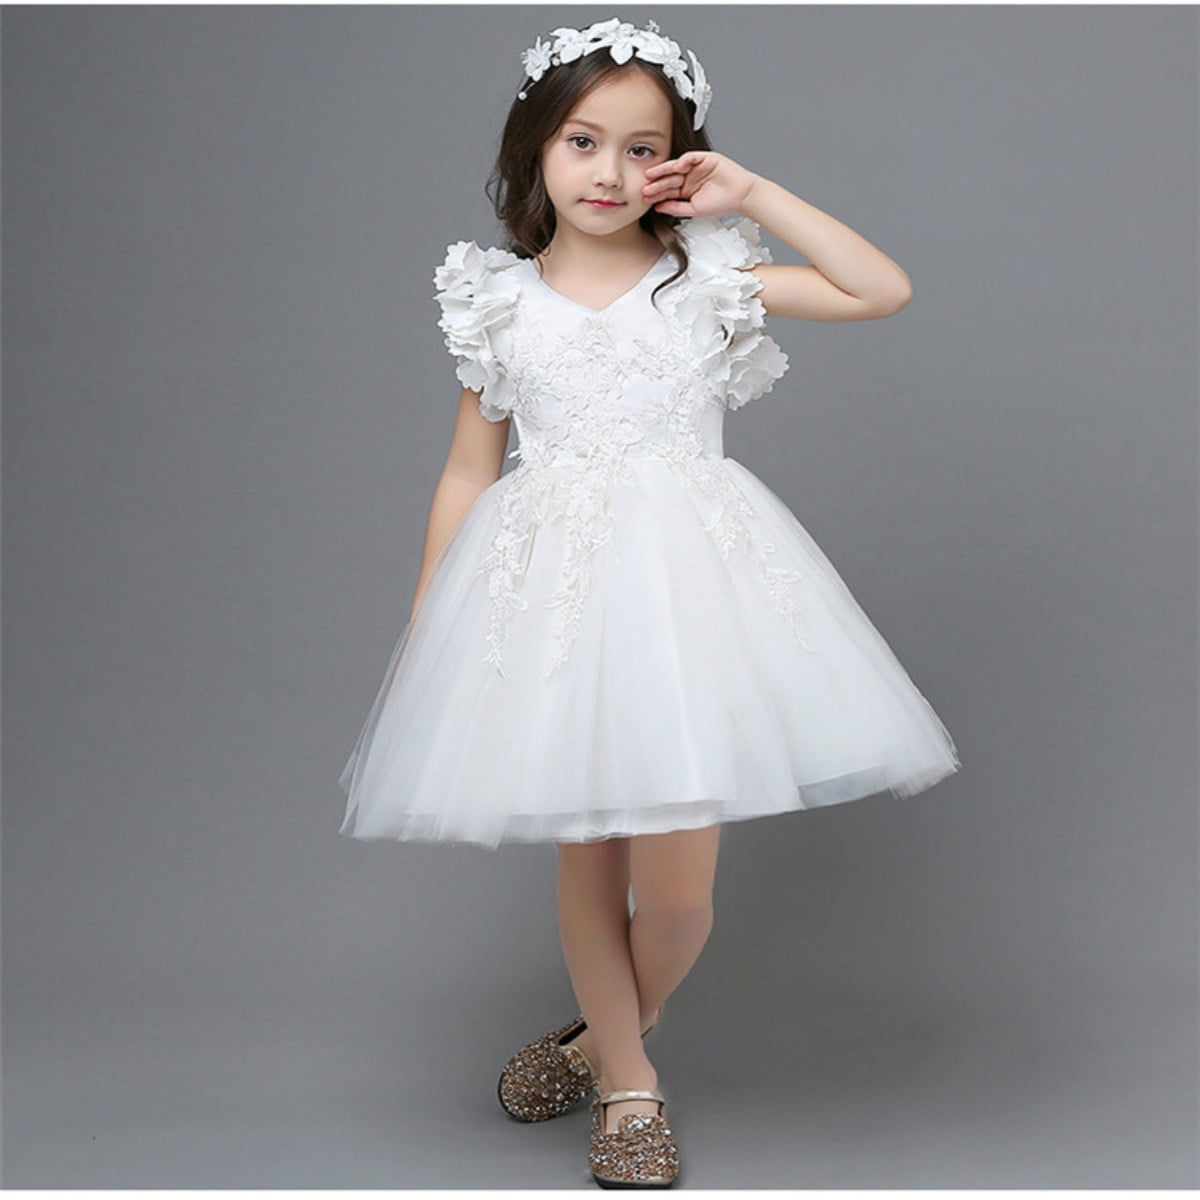 Avadress Elegant Lace Appliques Cap Sleeves Tulle Flower Girl Dress Kids Cute Backless Dress Toddler Party Tulle Tutu Dresses 0-12 Years 4 / Ivory